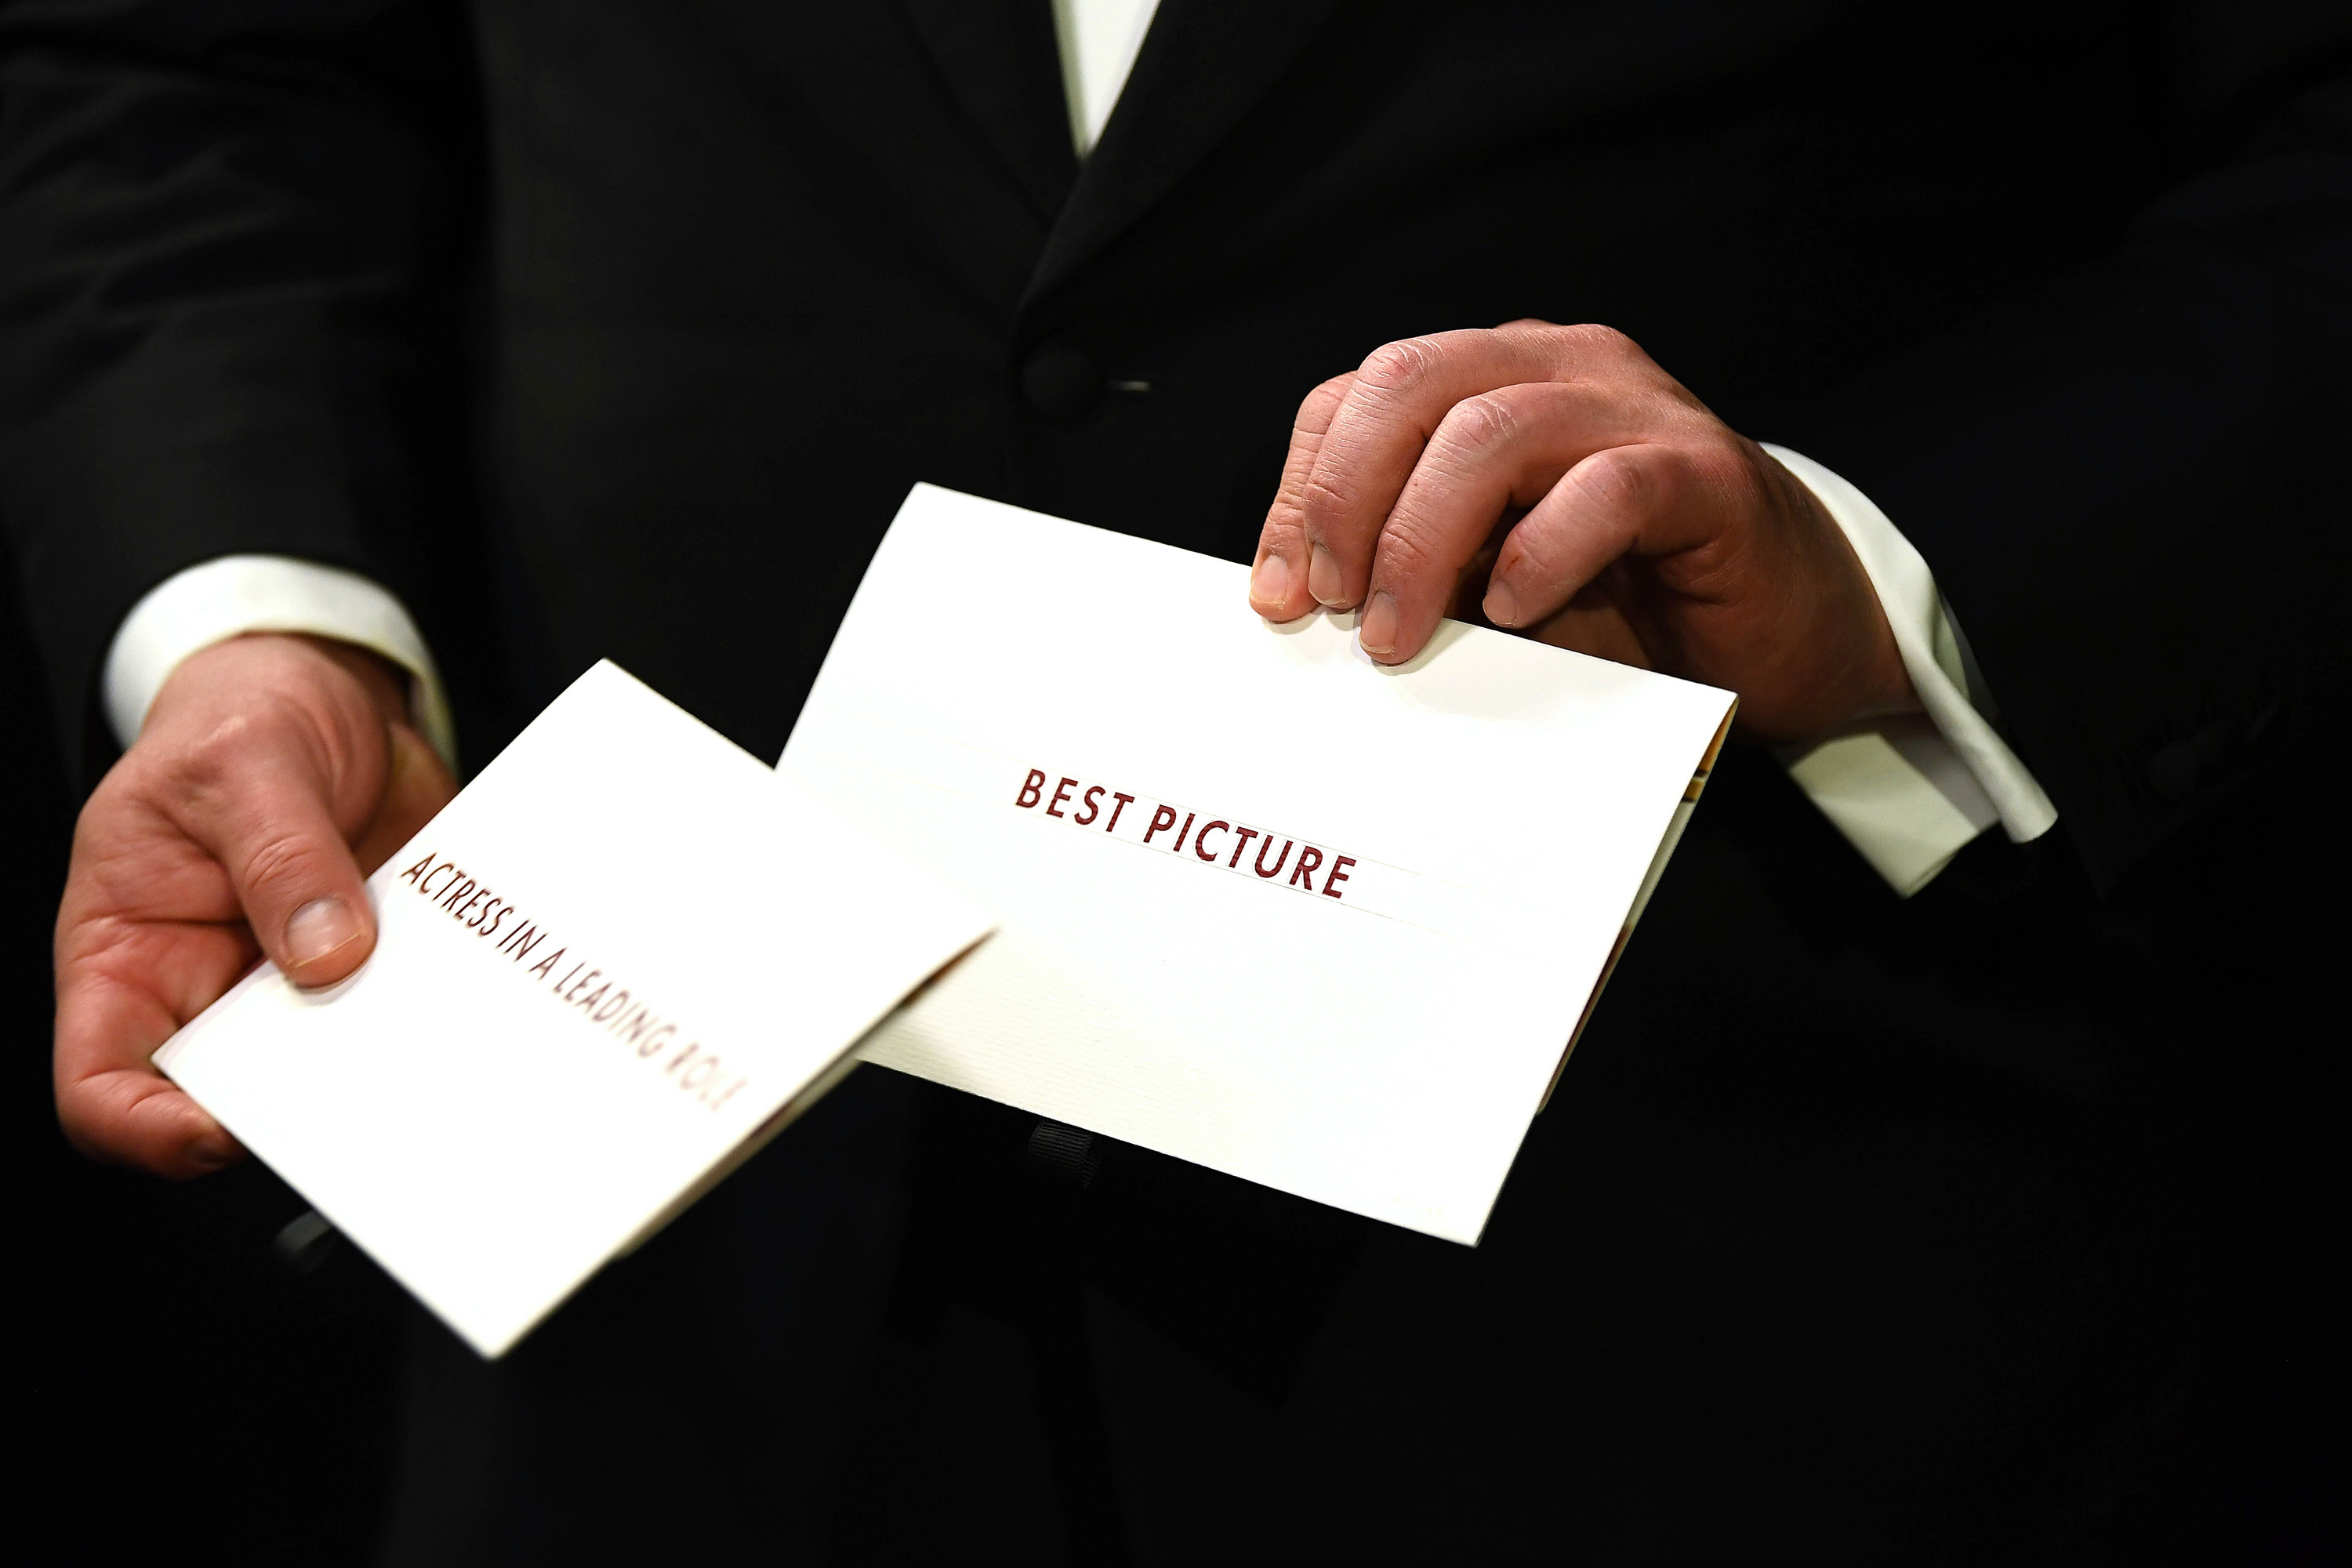 A pair of hands holding white envelopes for Best Picture and Best Actress awards